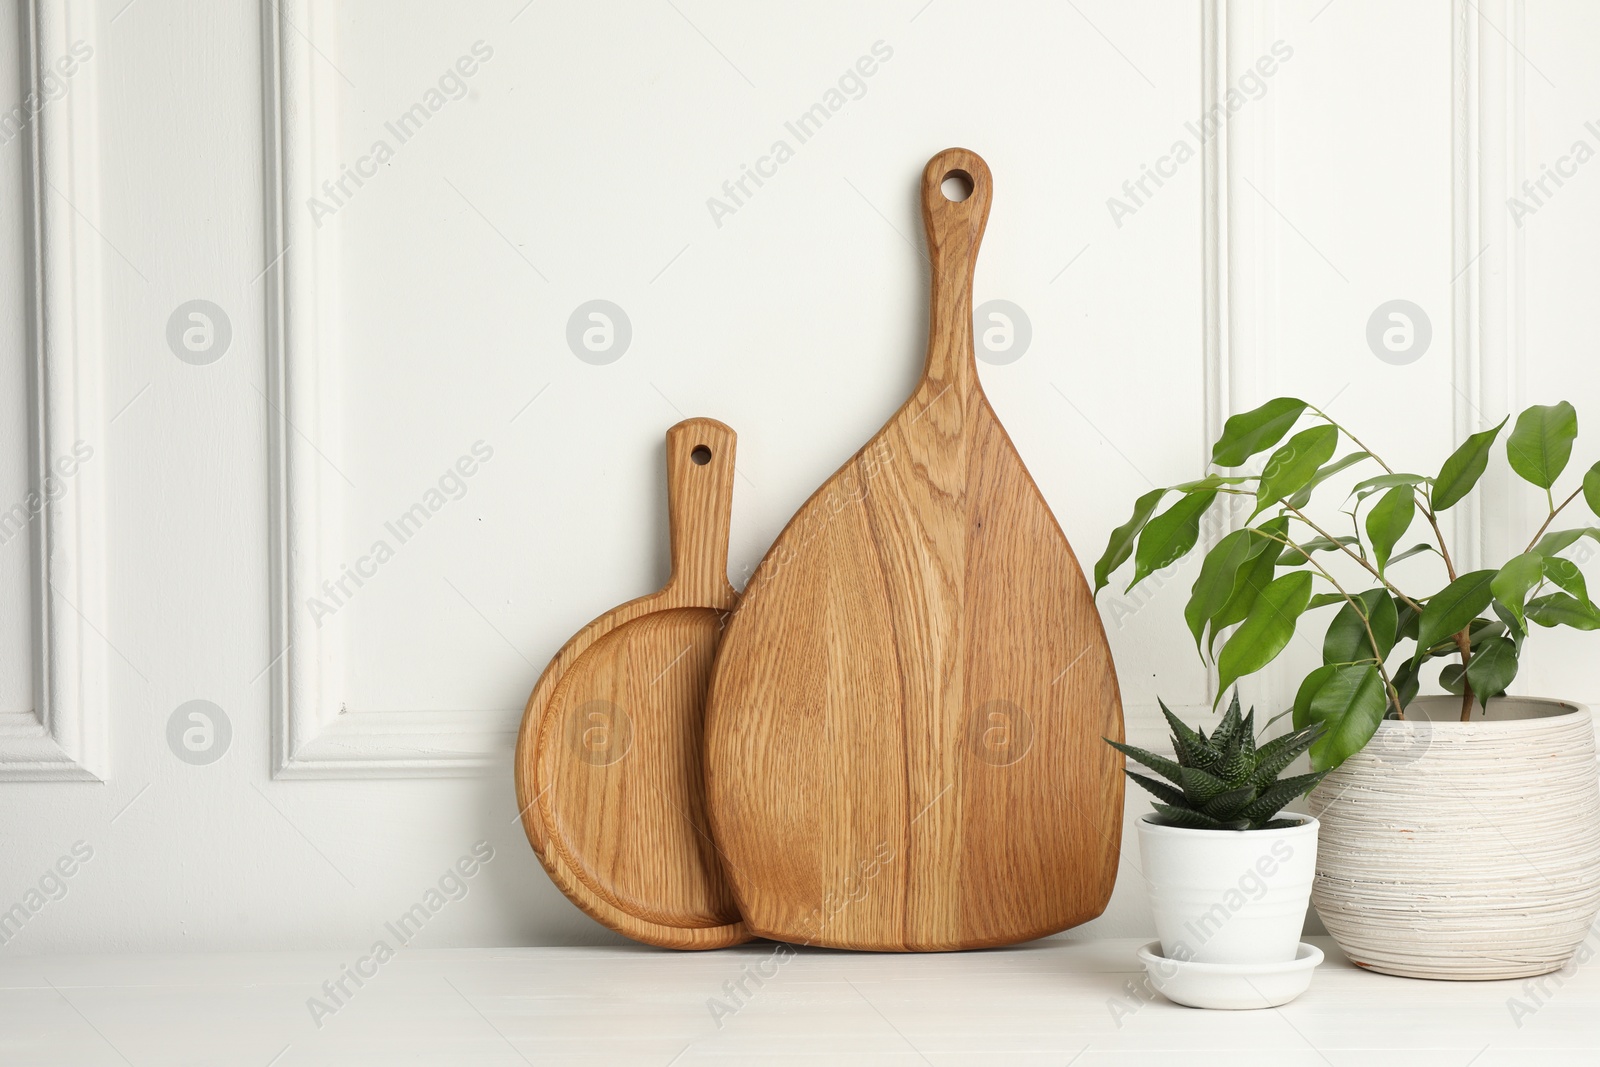 Photo of Wooden cutting boards and houseplants on white table, space for text